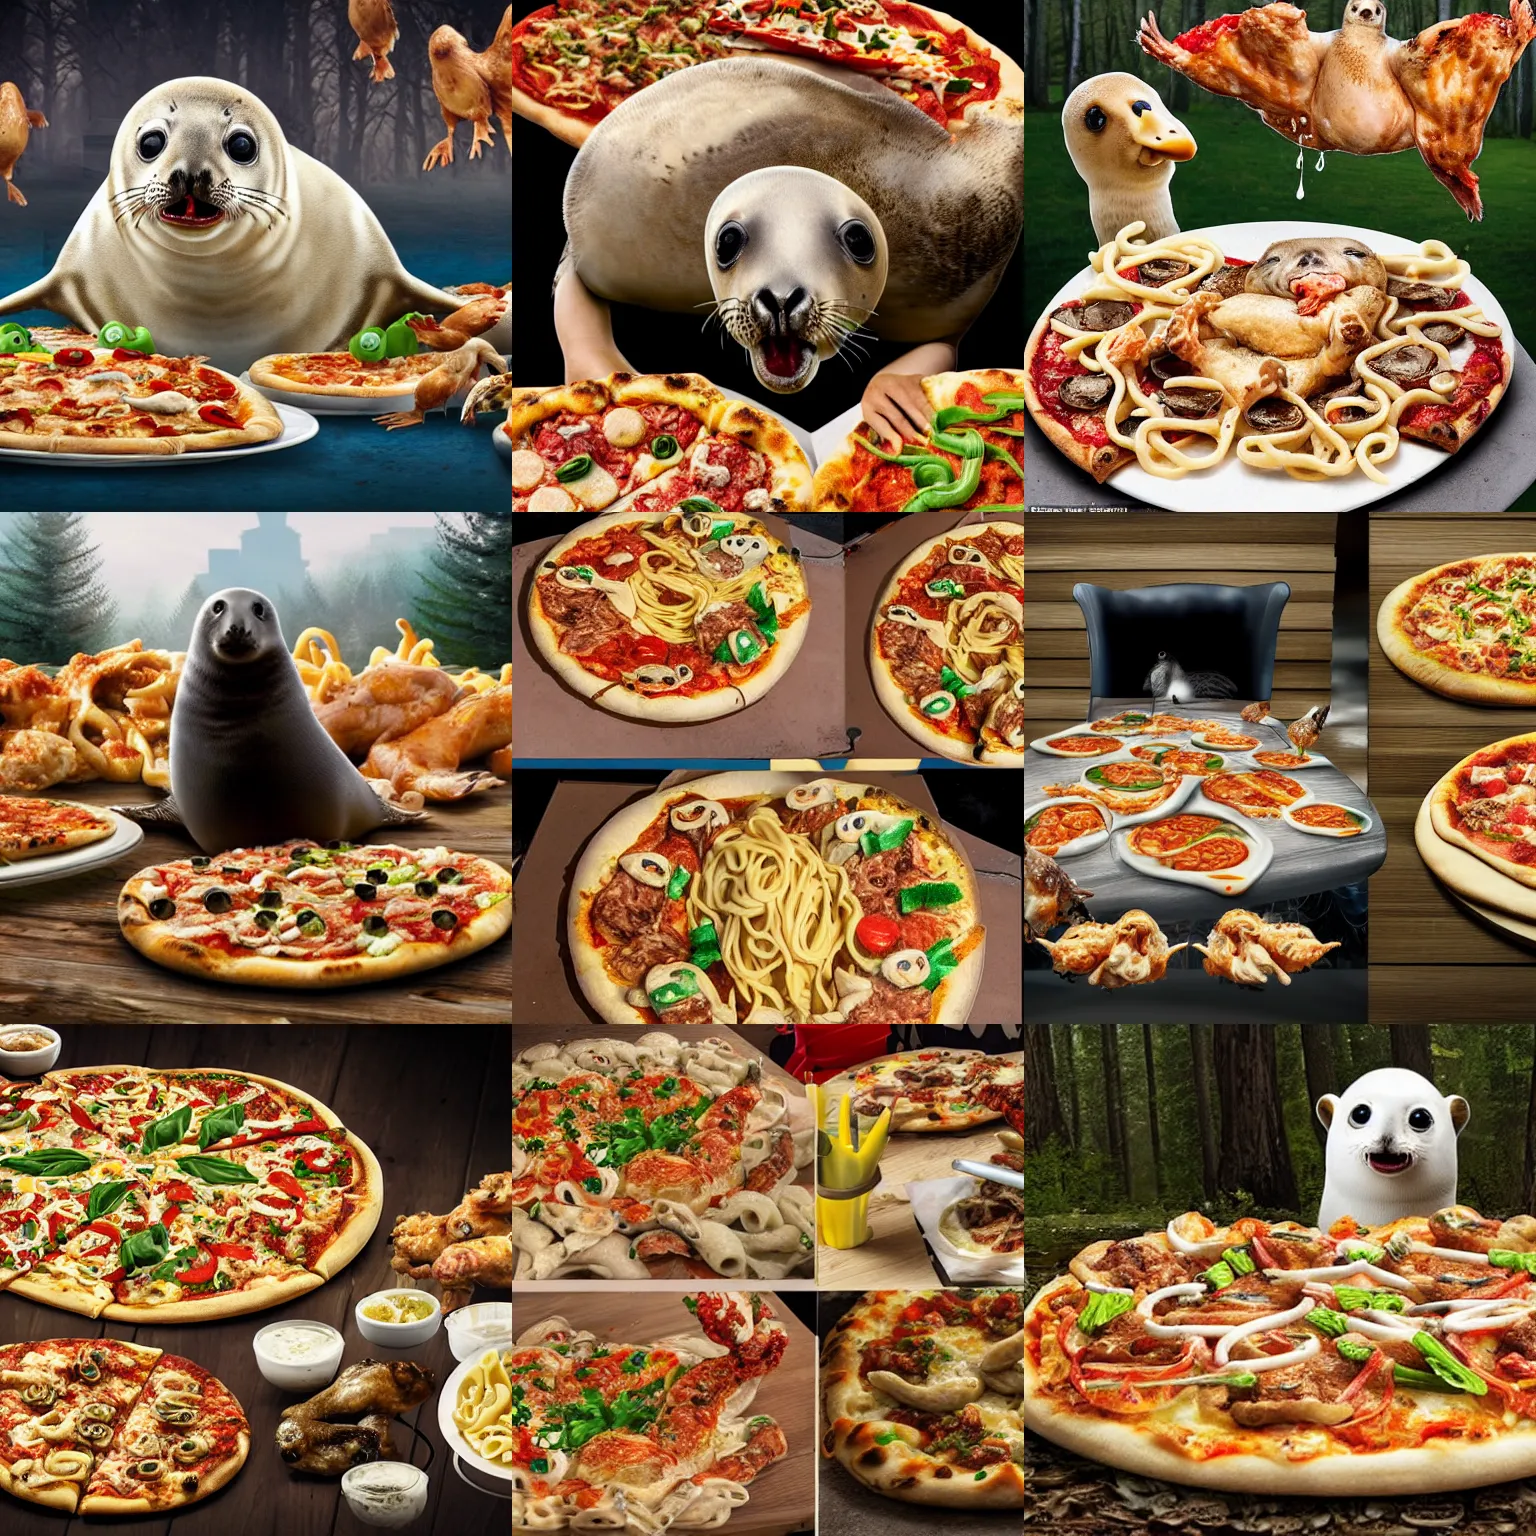 Prompt: photorealistic baby seal eating a disgusting amount of chicken wings and living mutant pasta fazool surrounded by an audience of biomechanical pizza ducks laughing and dripping with mayonnaise in a Washington area forest